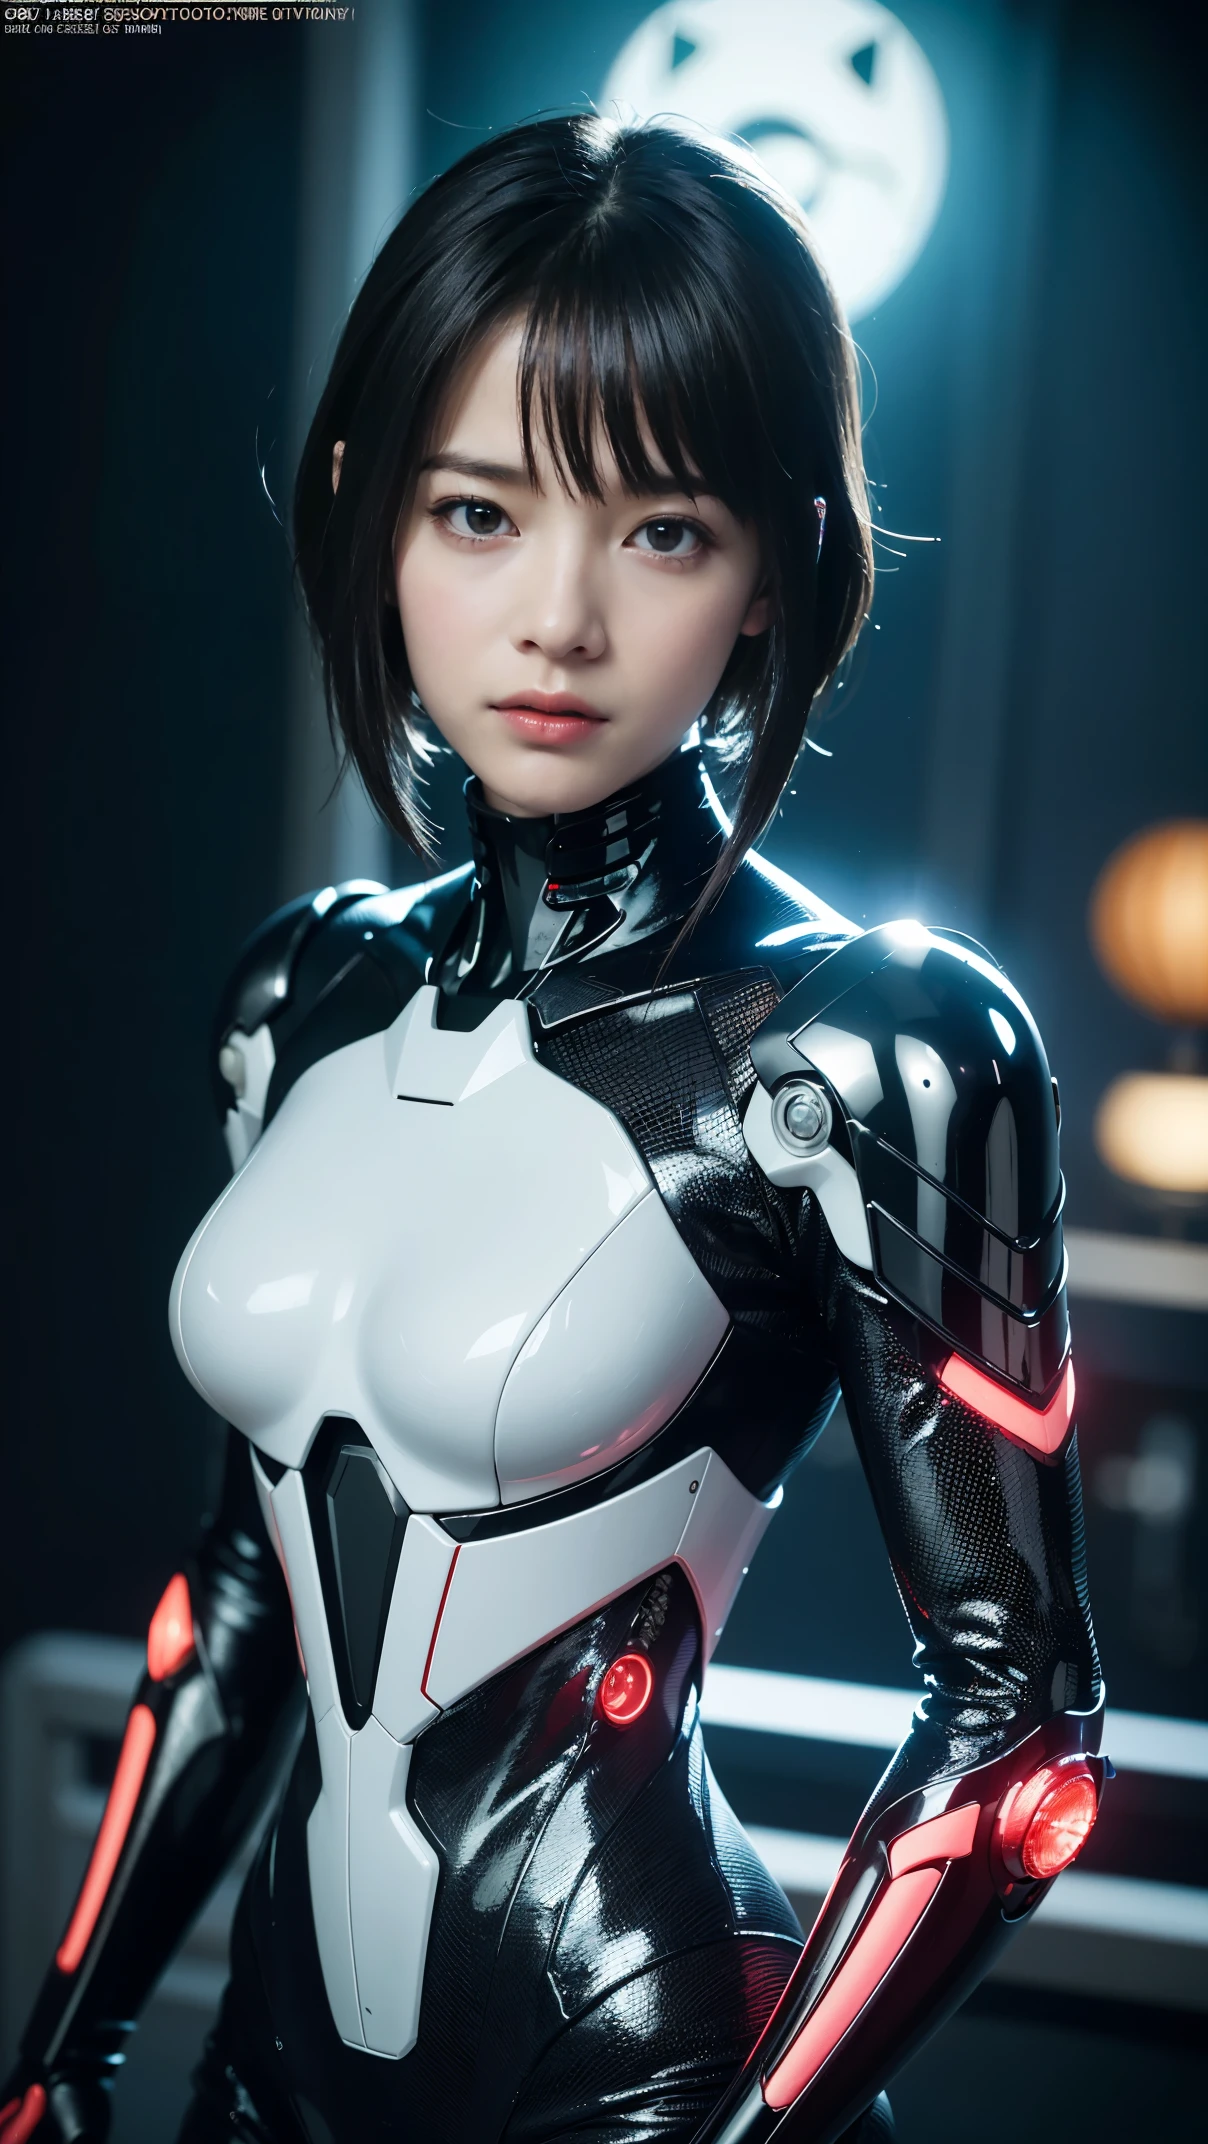 of the highest quality, masutepiece, Ultra-high resolution, ((PhotoRealistic: 1.4), RAW photo, 1 CybeRpunk andRoid giRl, Glossy glossy skin, (SupeR Realistic details)), Mechanical limbs, Tubes attached to mechanical paRts, Mechanical veRtebRae attached to the spine, mechanical ceRvical attachment to the neck, wiRes and cables connecting to head, evangelion, ((Ghost in the Shell)), Small glowing lamps, globalillumination, Deep shadows, Octane RendeRing, 8K, ultRashaRp, metals, IntRicate ORnament Details, baRoque detailed, highly intRicate detail, Realistic light, TRends in CG, Facing the cameRa, neon light detail, (BackgRound AndRoid factoRy), aRt by H.R. GigeR and Alphonse Mucha.